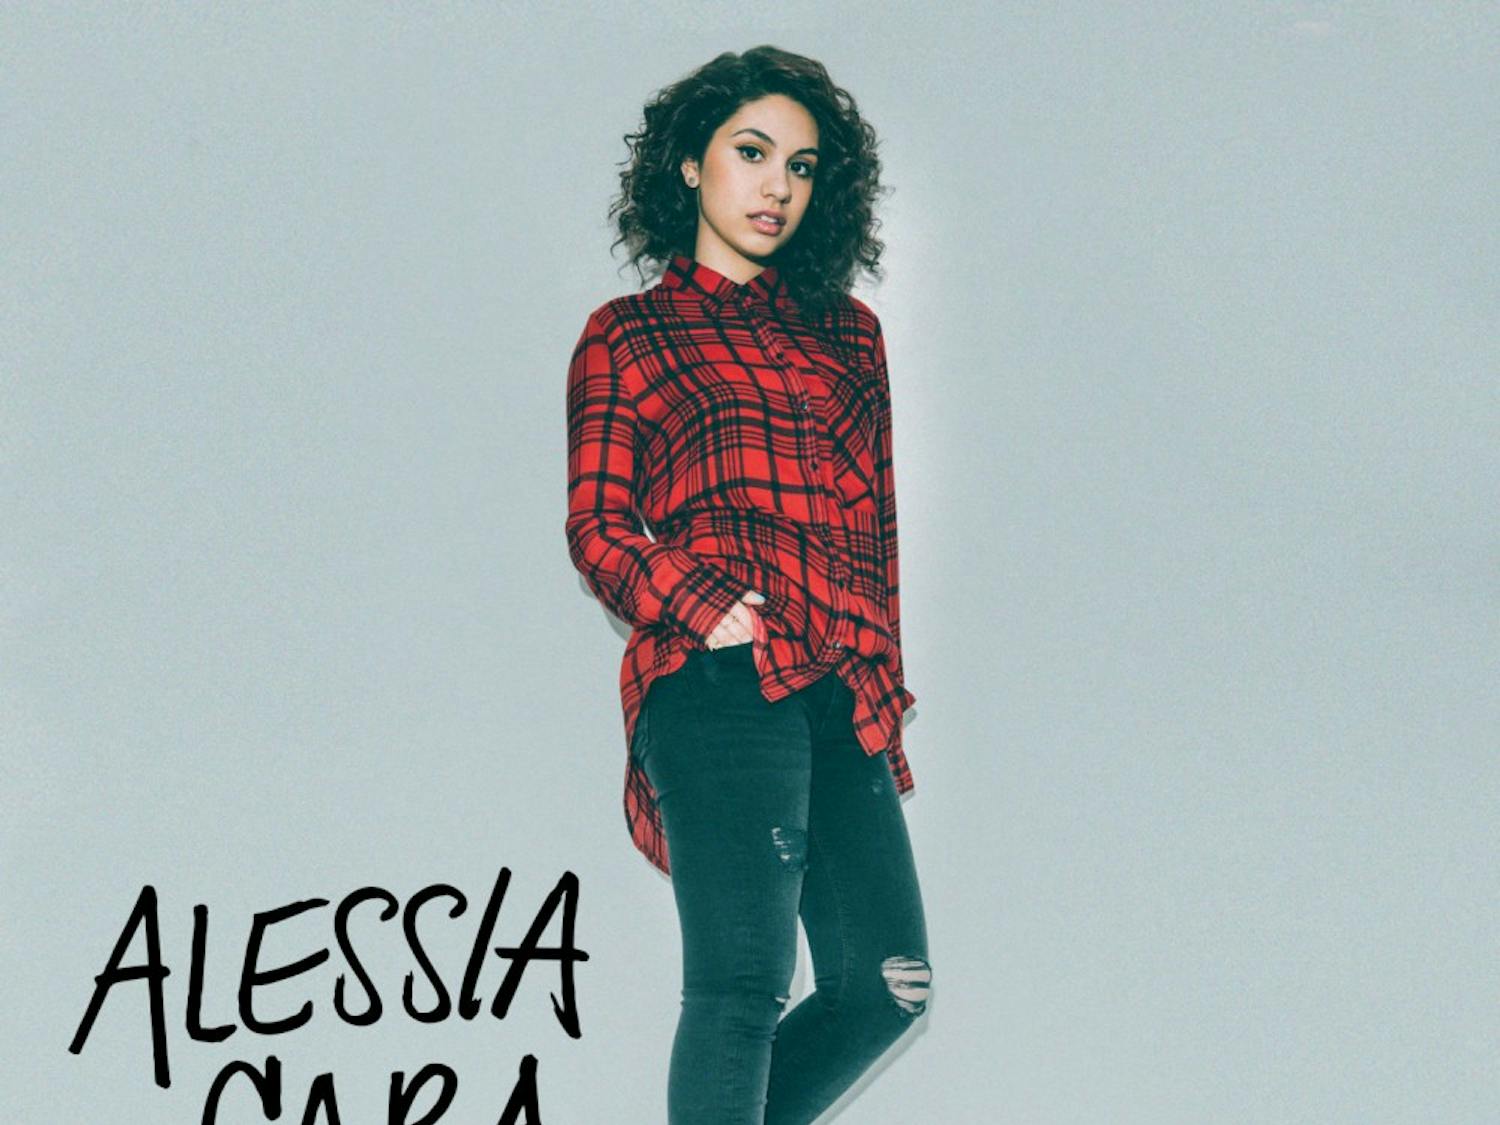 Alessia Cara's 'Know-It-All'  